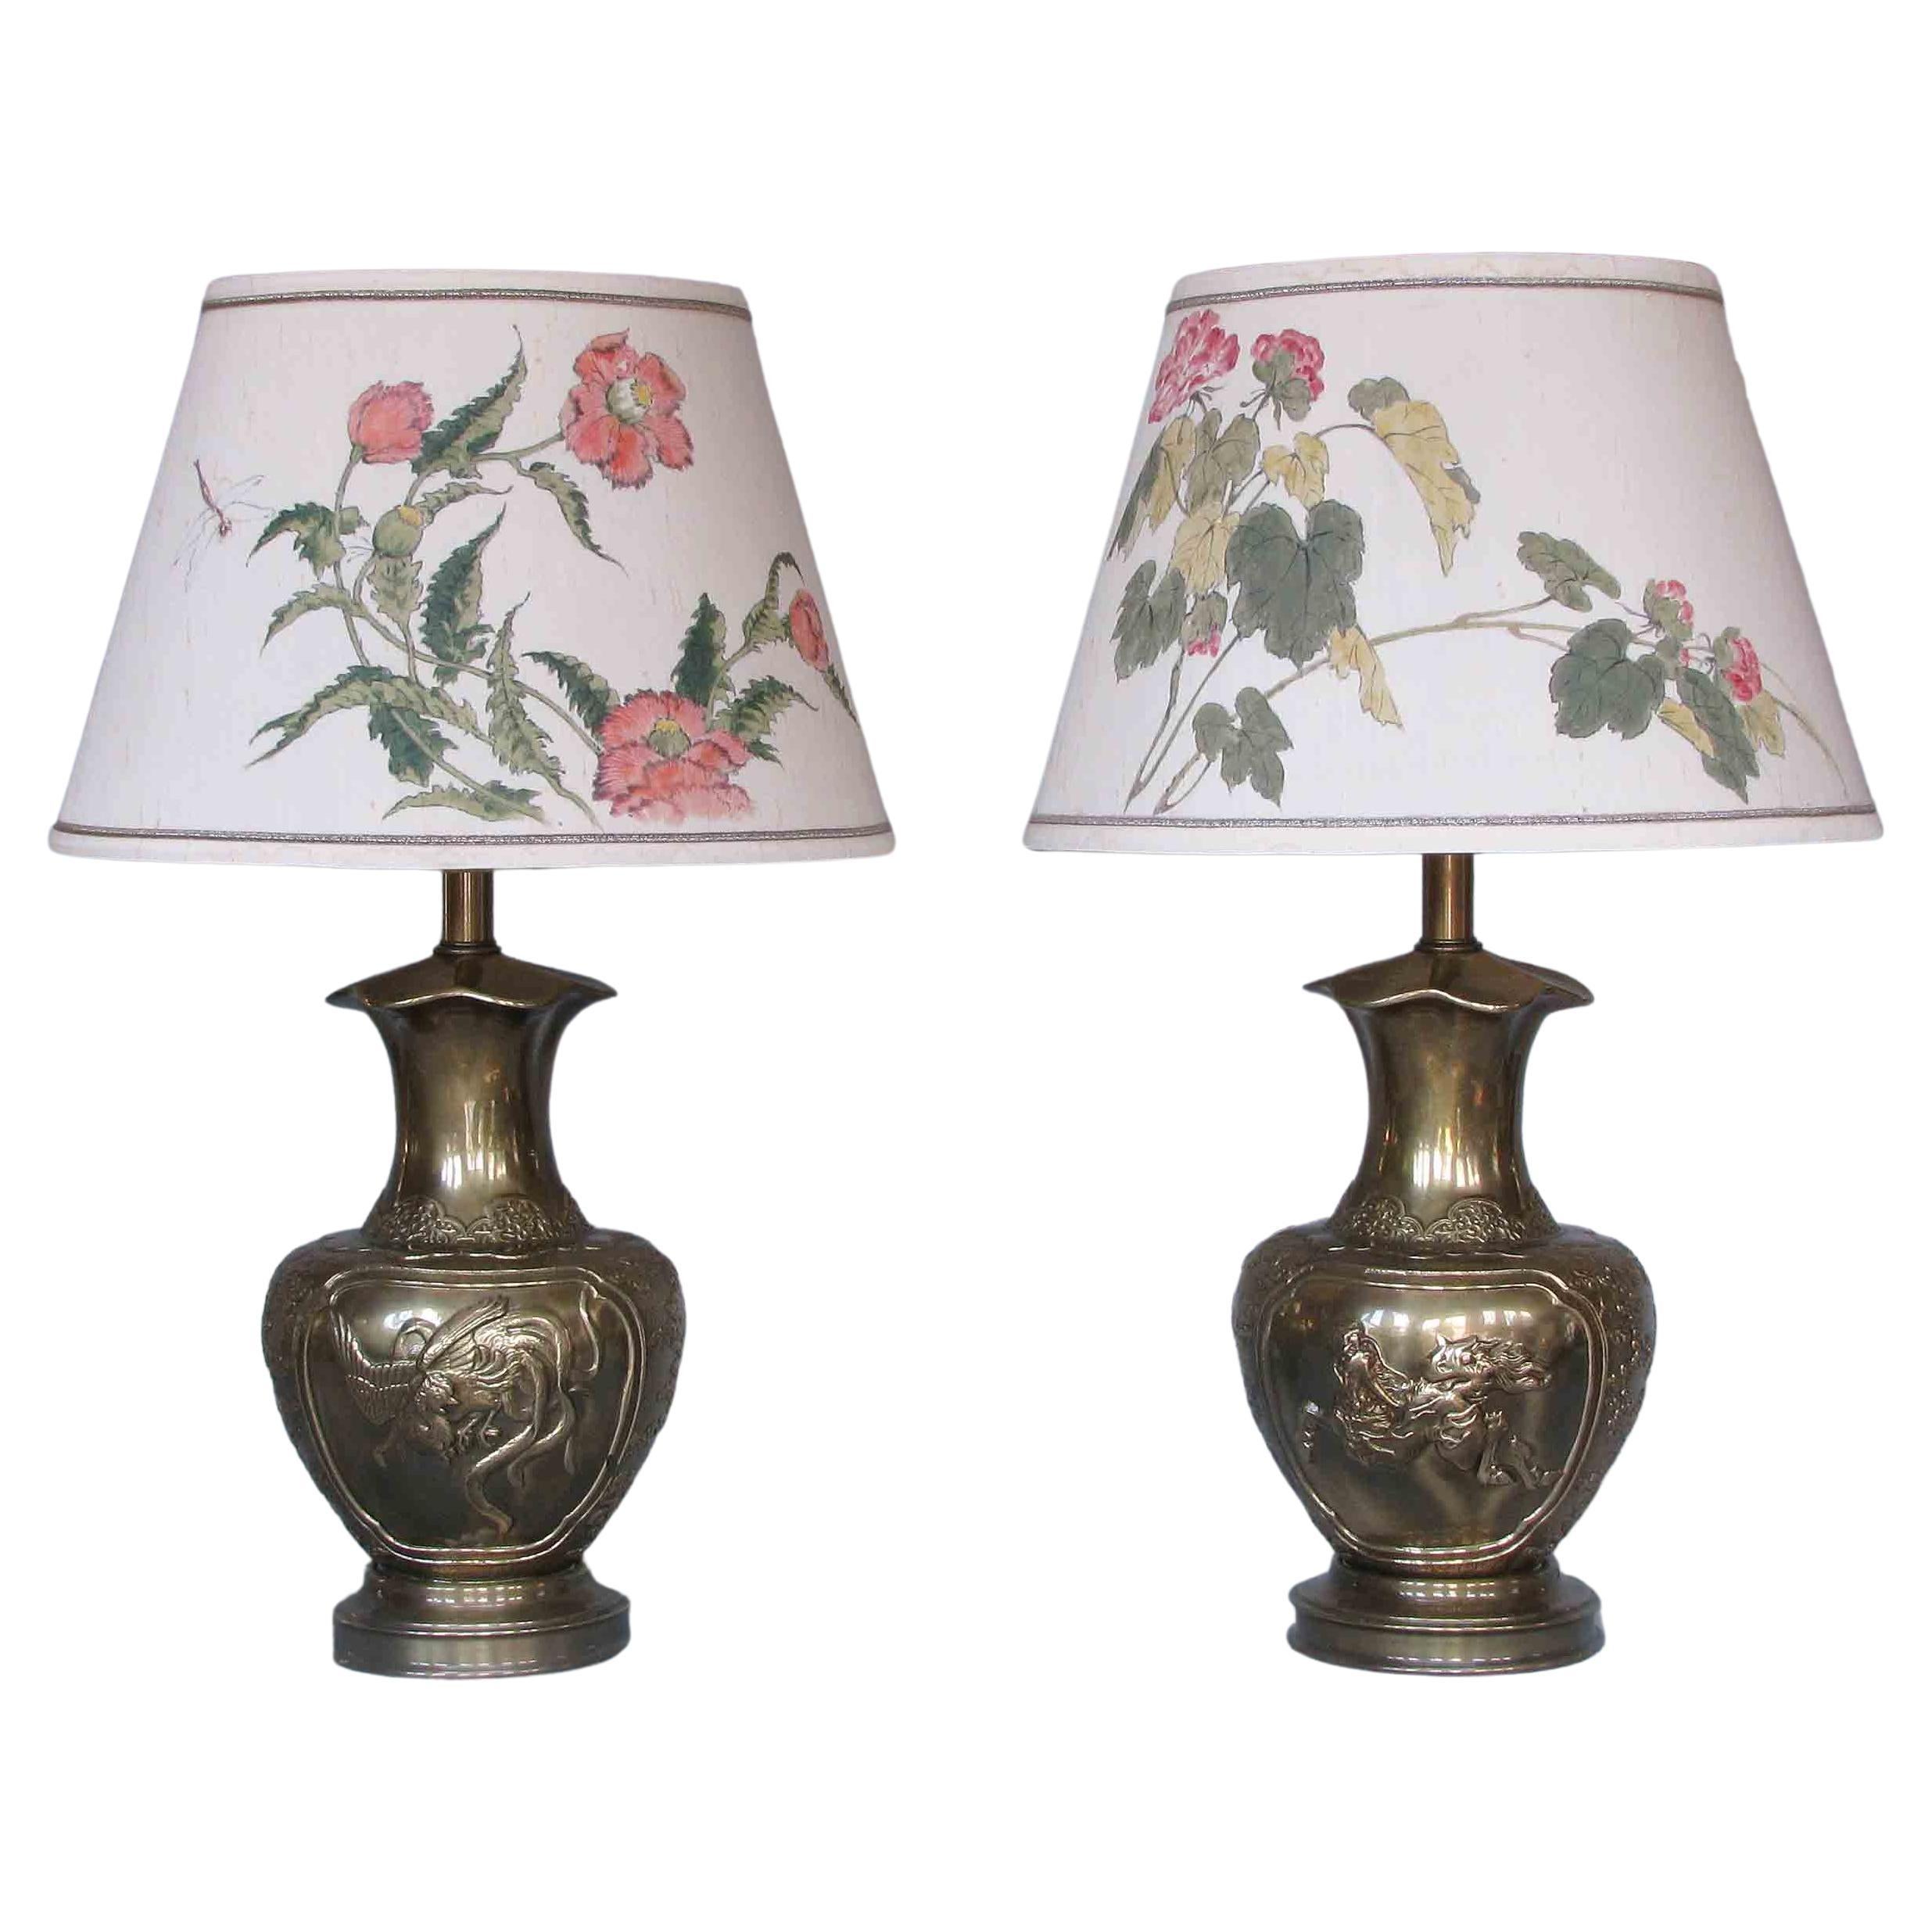 Very Decorative Table Lamps, Japanese Style by Tyndale for Frederick Cooper Co. For Sale